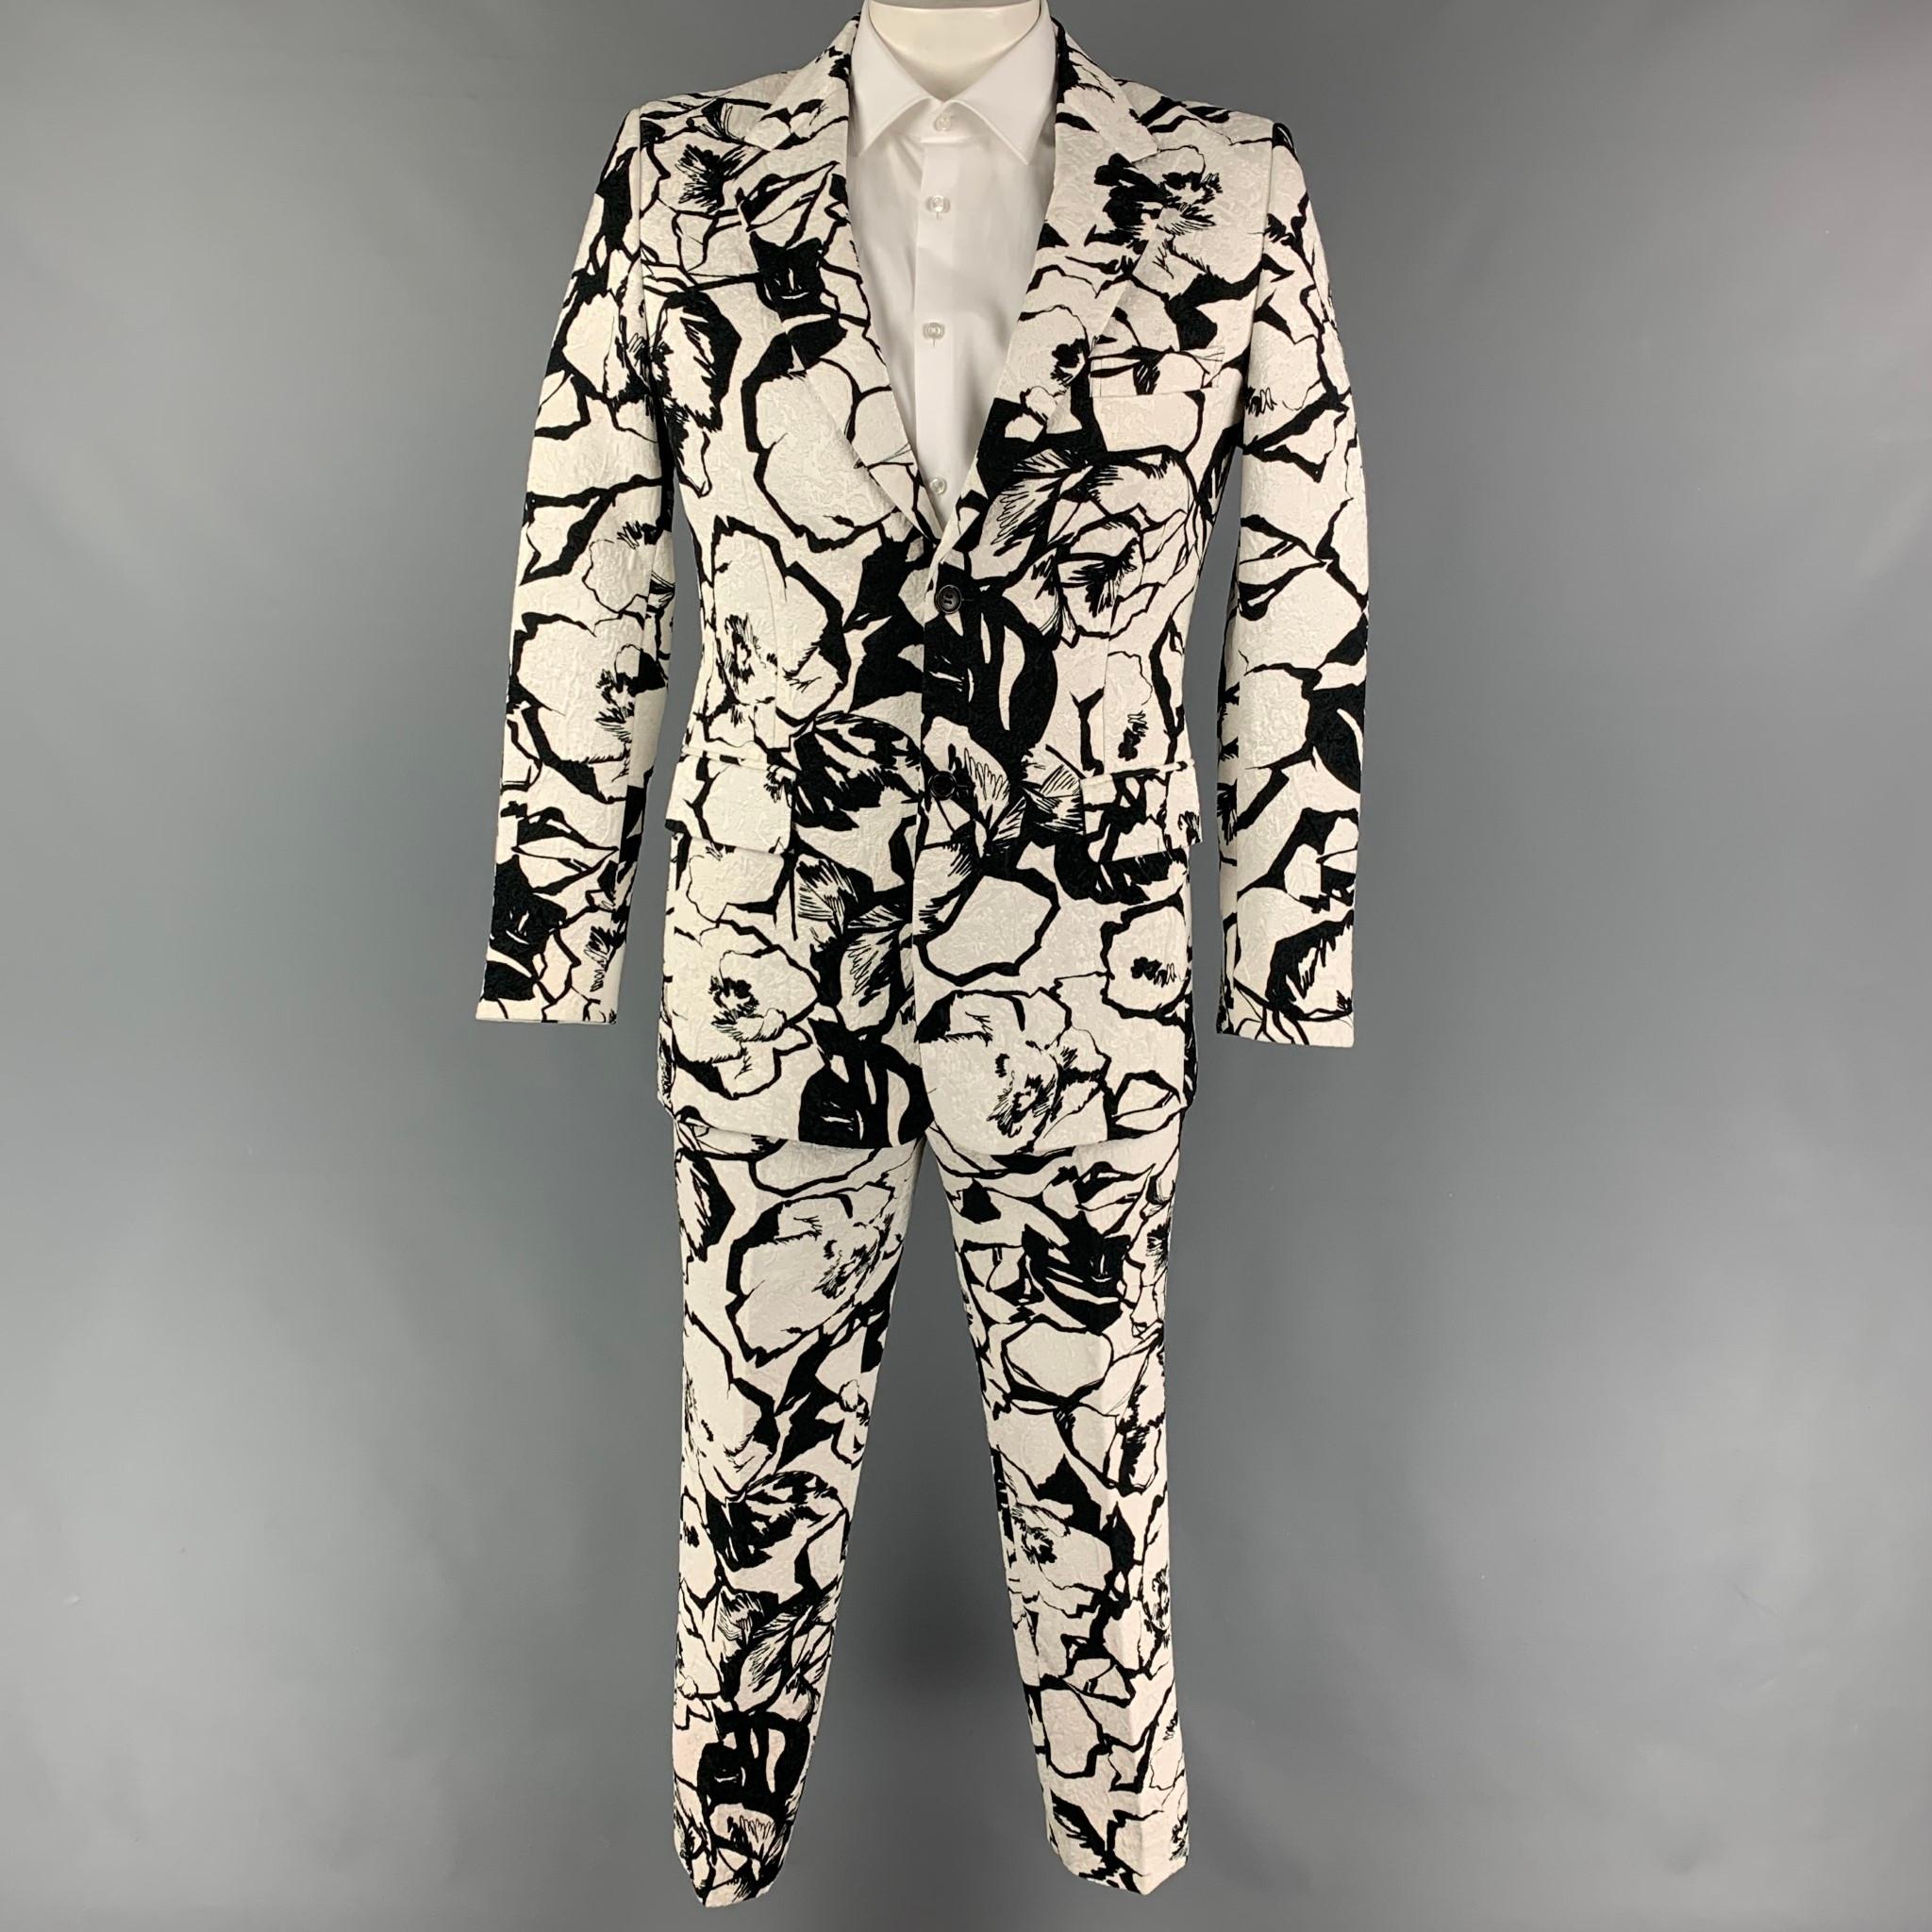 COMME des GARCONS HOMME PLUS suit comes in a black & white jacquard cotton with a half liner and includes a single breasted, double button sport coat with a notch lapel and matching flat front trousers. Made in Japan.

Very Good Pre-Owned